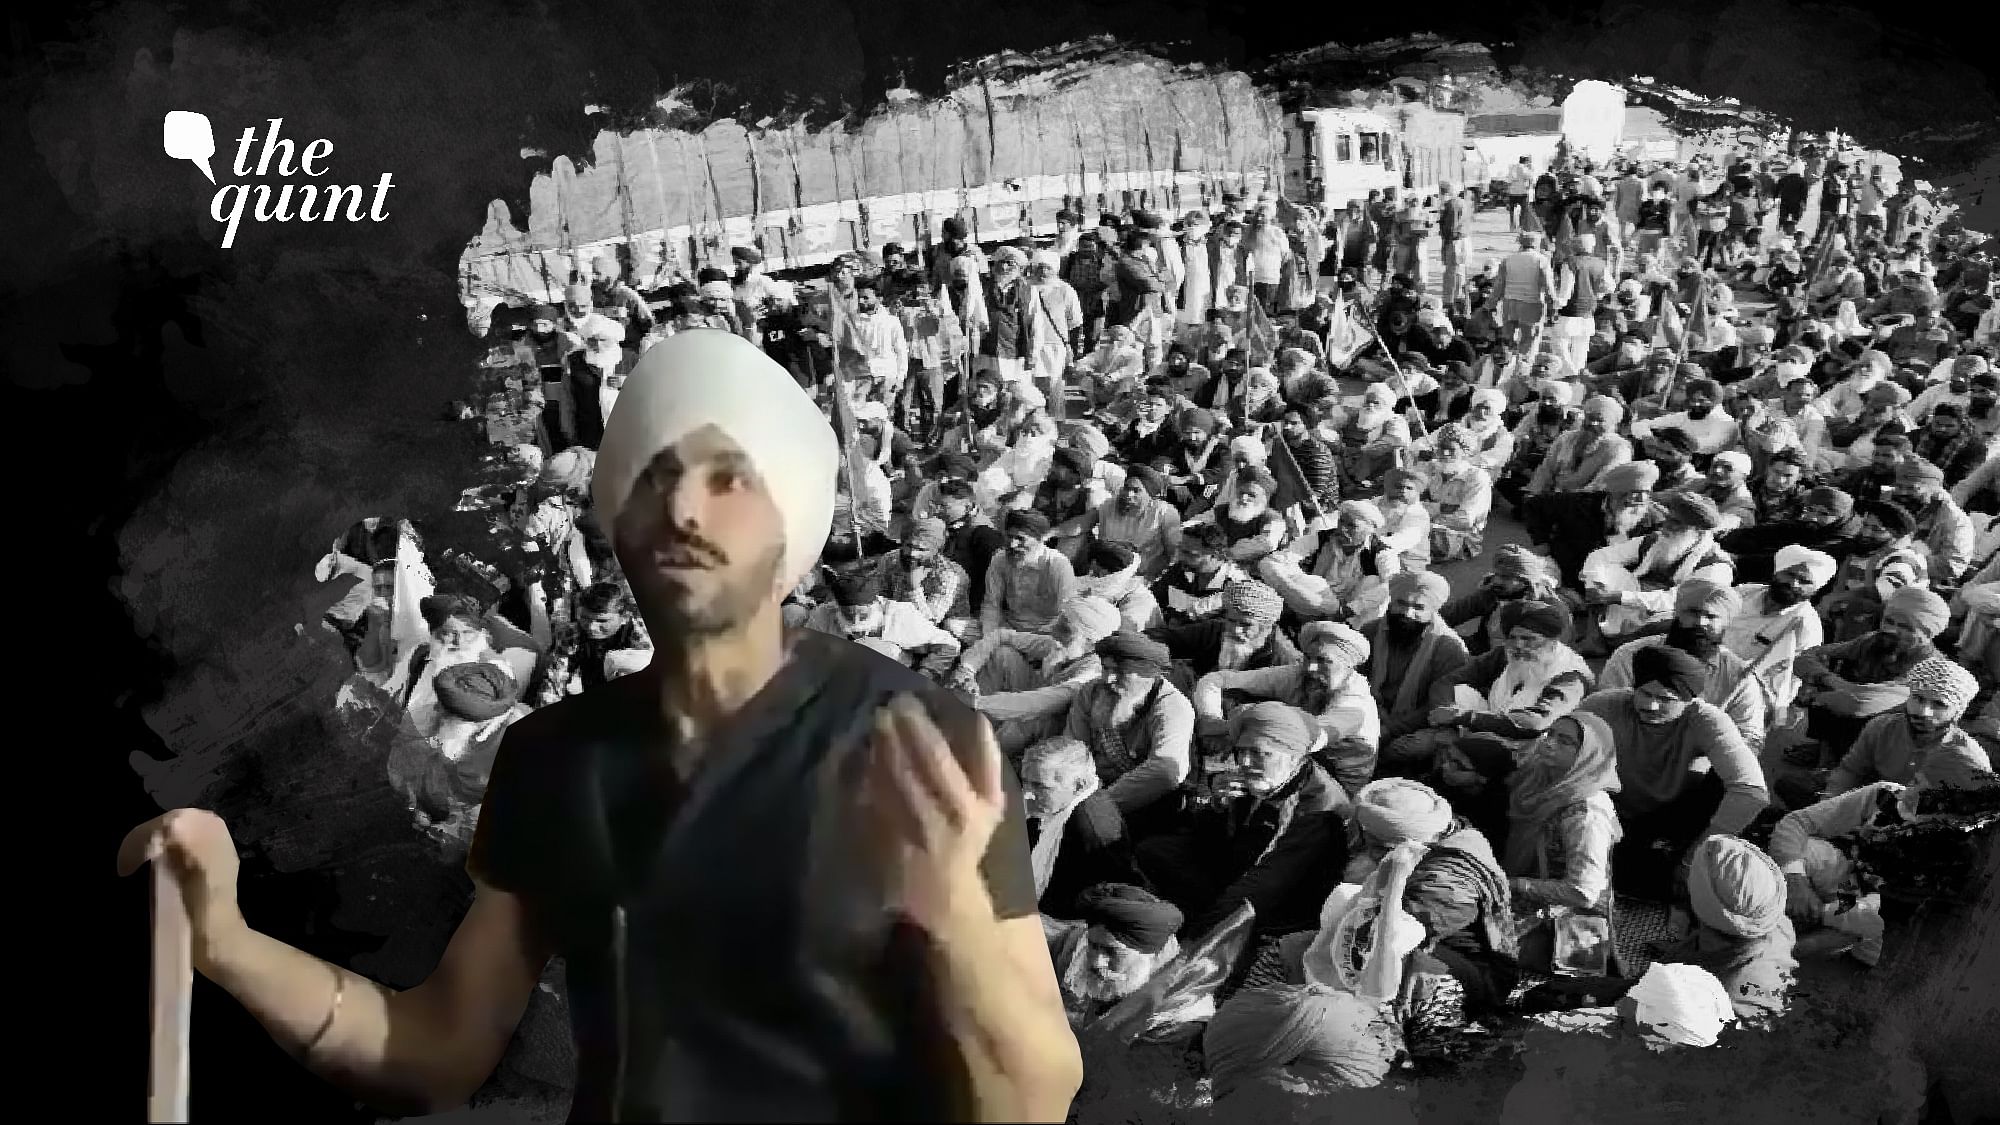 The Delhi Police on Wednesday, 3 February, announced cash rewards for any information leading to the arrest of several accused of the 26 January violence in Delhi, including Punjabi celebrity Deep Sidhu.